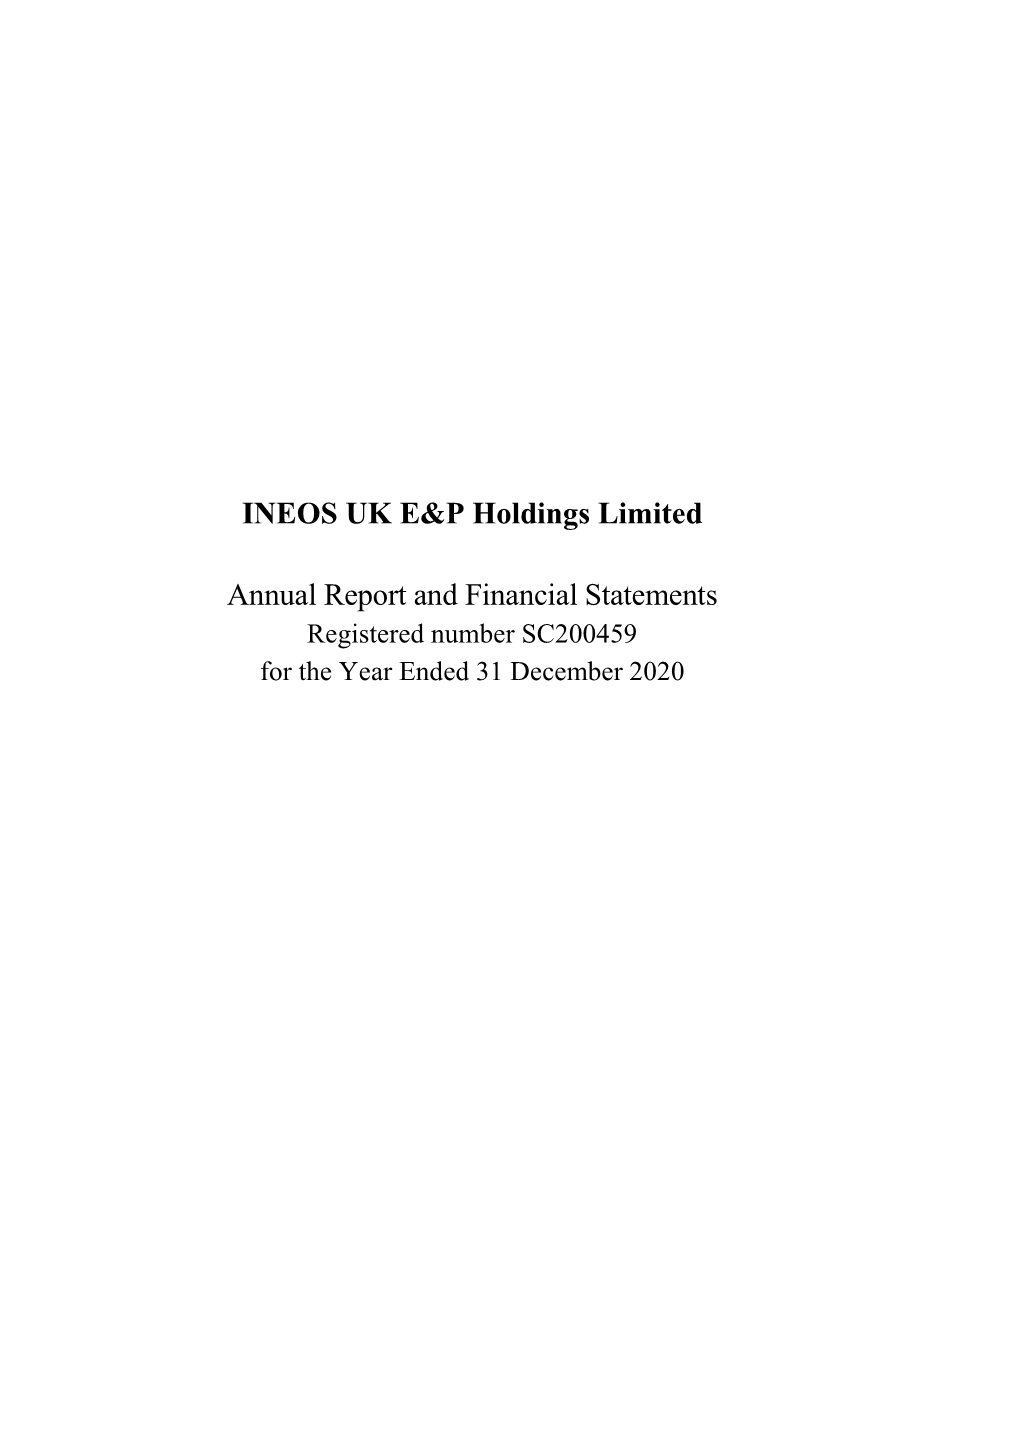 INEOS UK E&P Holdings Limited Annual Report and Financial